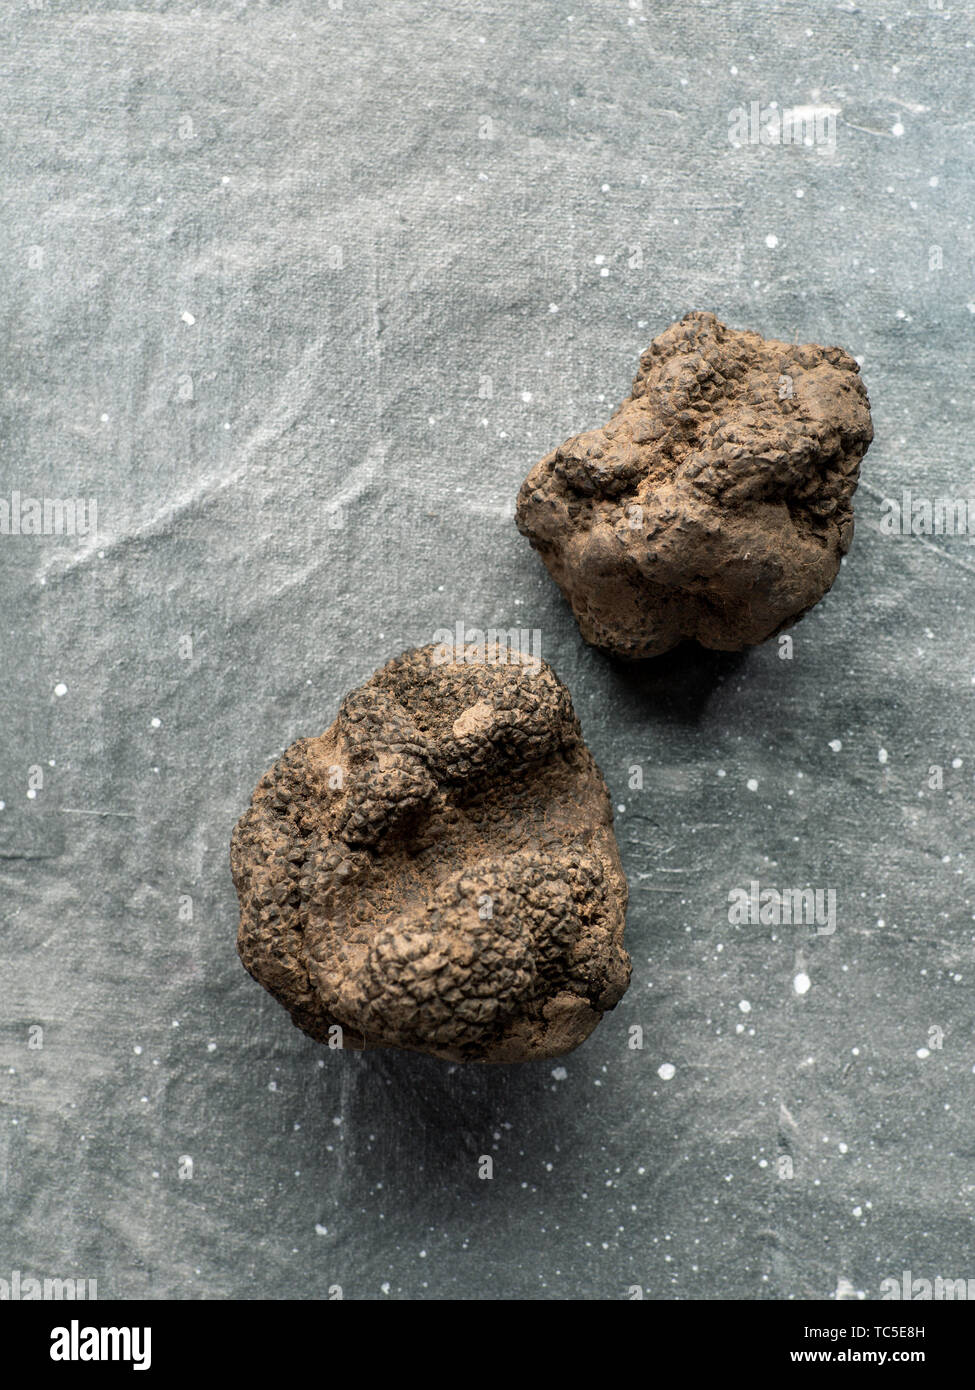 Expensive rare black truffle mushroom on gray background. Vertical. Black truffles top view with copy space for text or design. Stock Photo